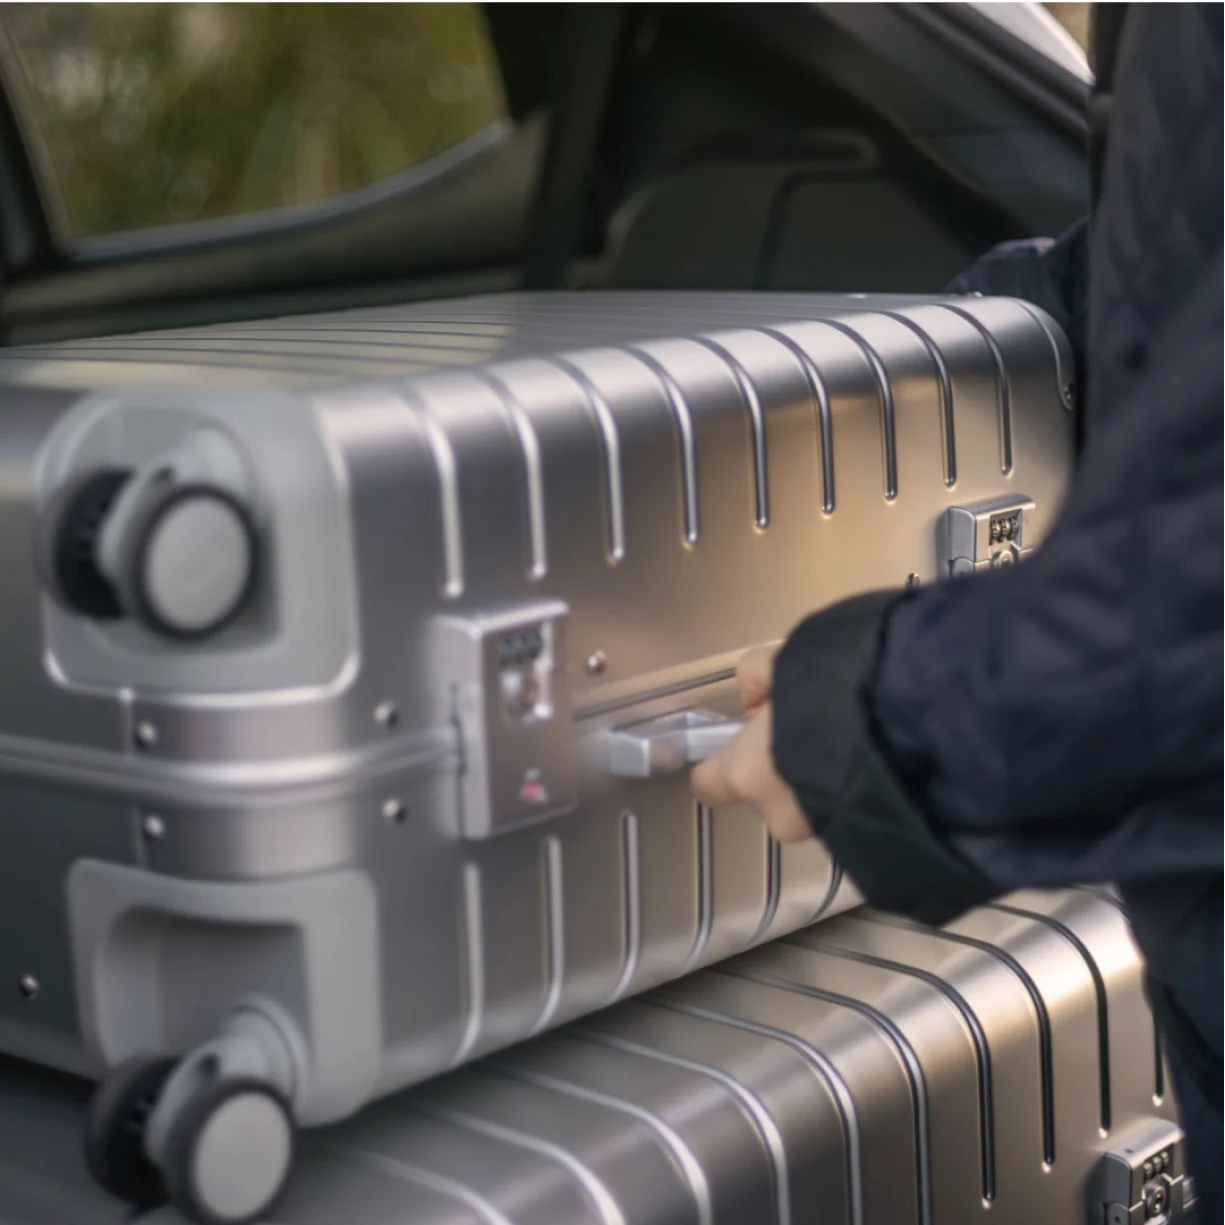 Away's Aluminum suitcases in a car, showing the dual TSA-accepted locks